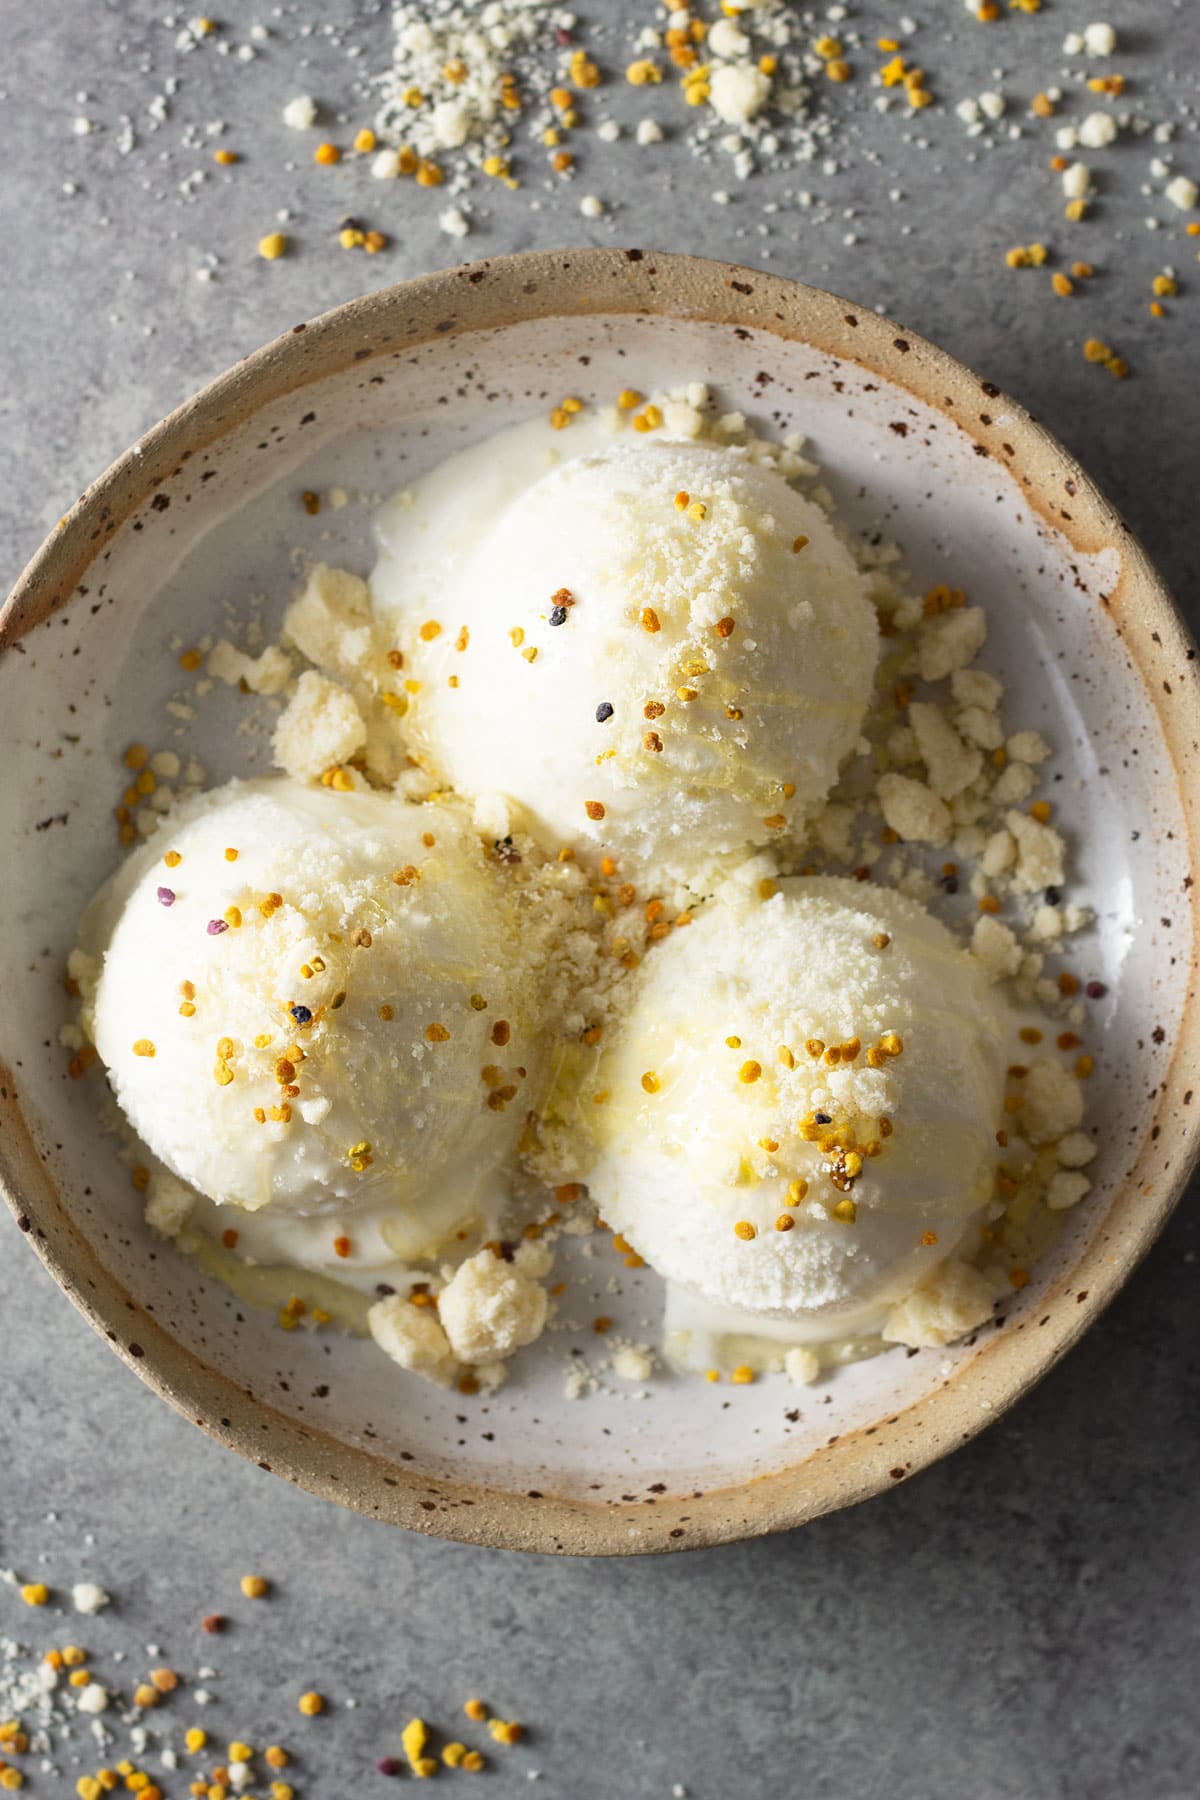 Overhead view of a rustic bowl with three scoops of milk and honey ice cream topped with honey, bee pollen and milk crumble.